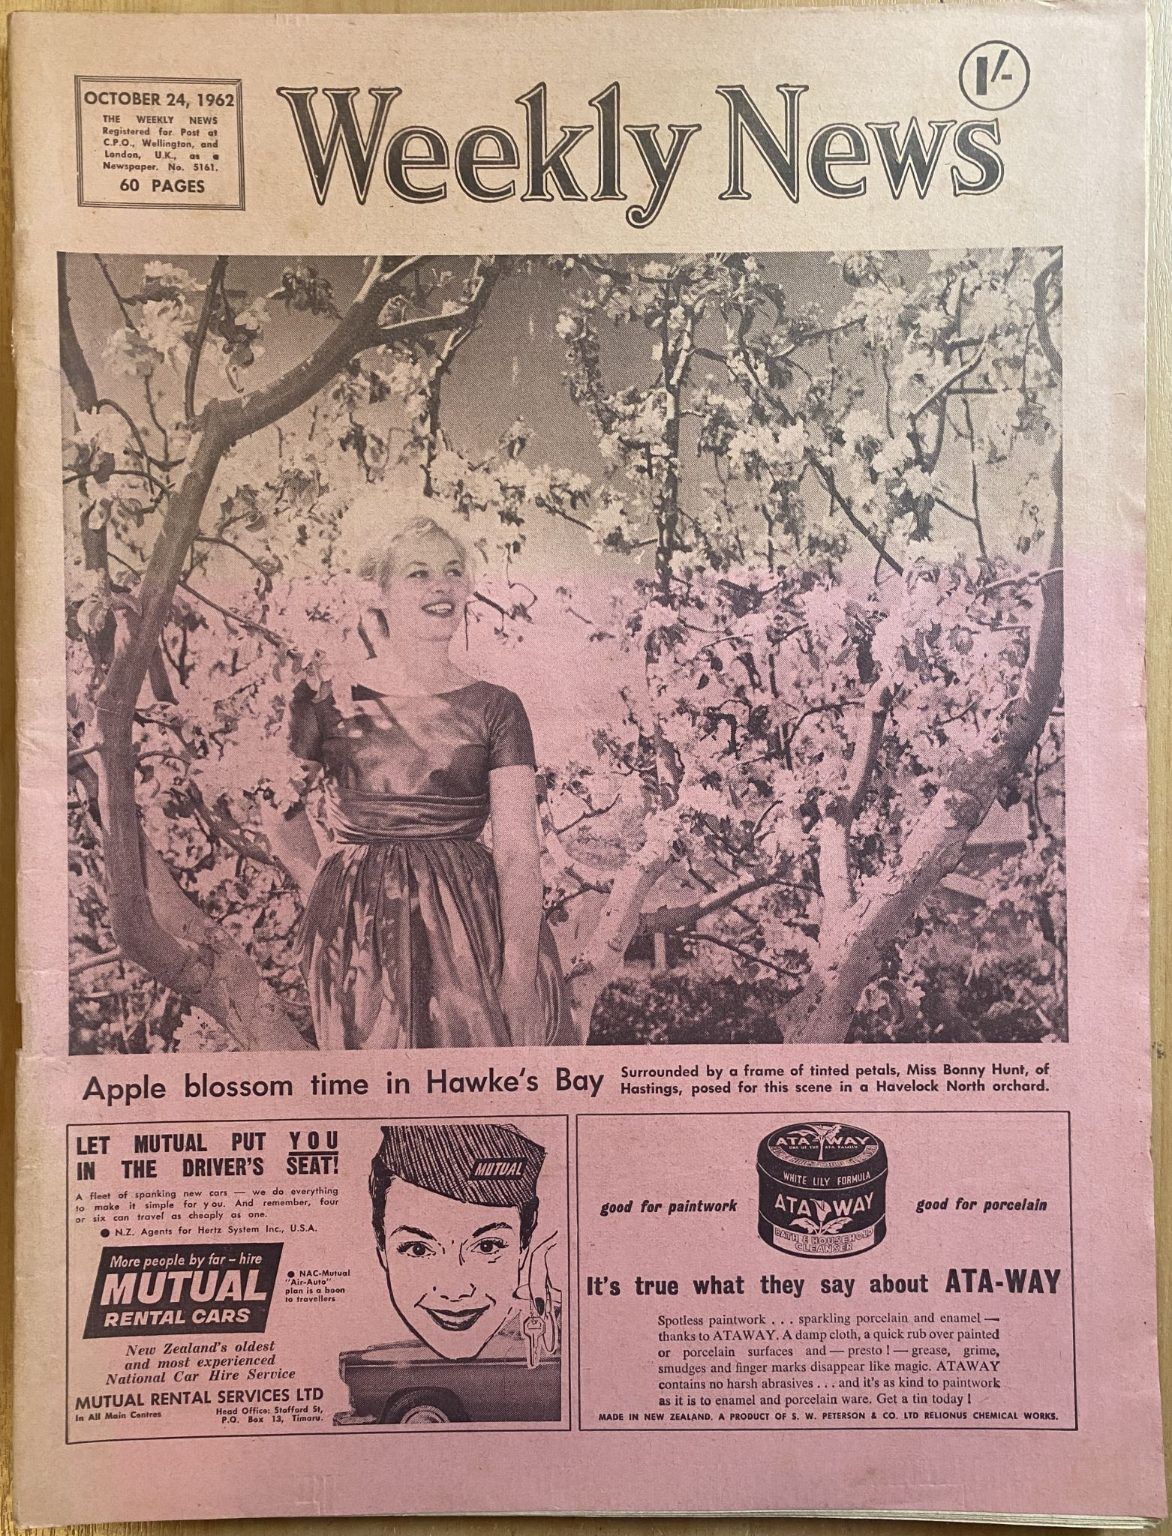 OLD NEWSPAPER: The Weekly News, No. 5161, 24 October 1962